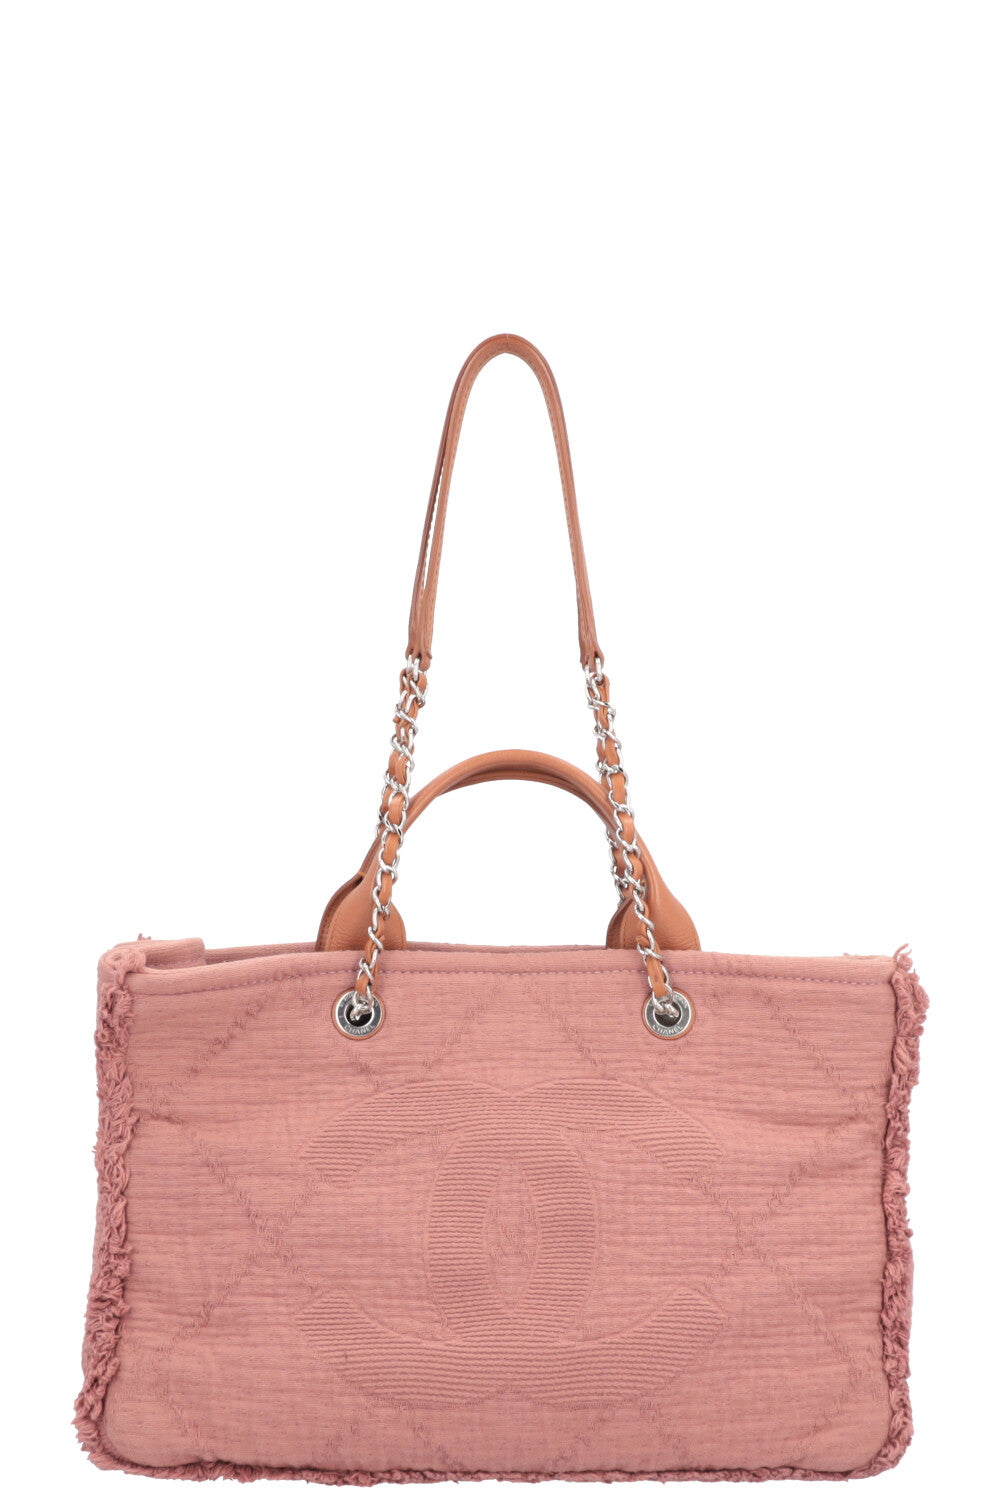 Chanel_Deauville_Tote_Pink